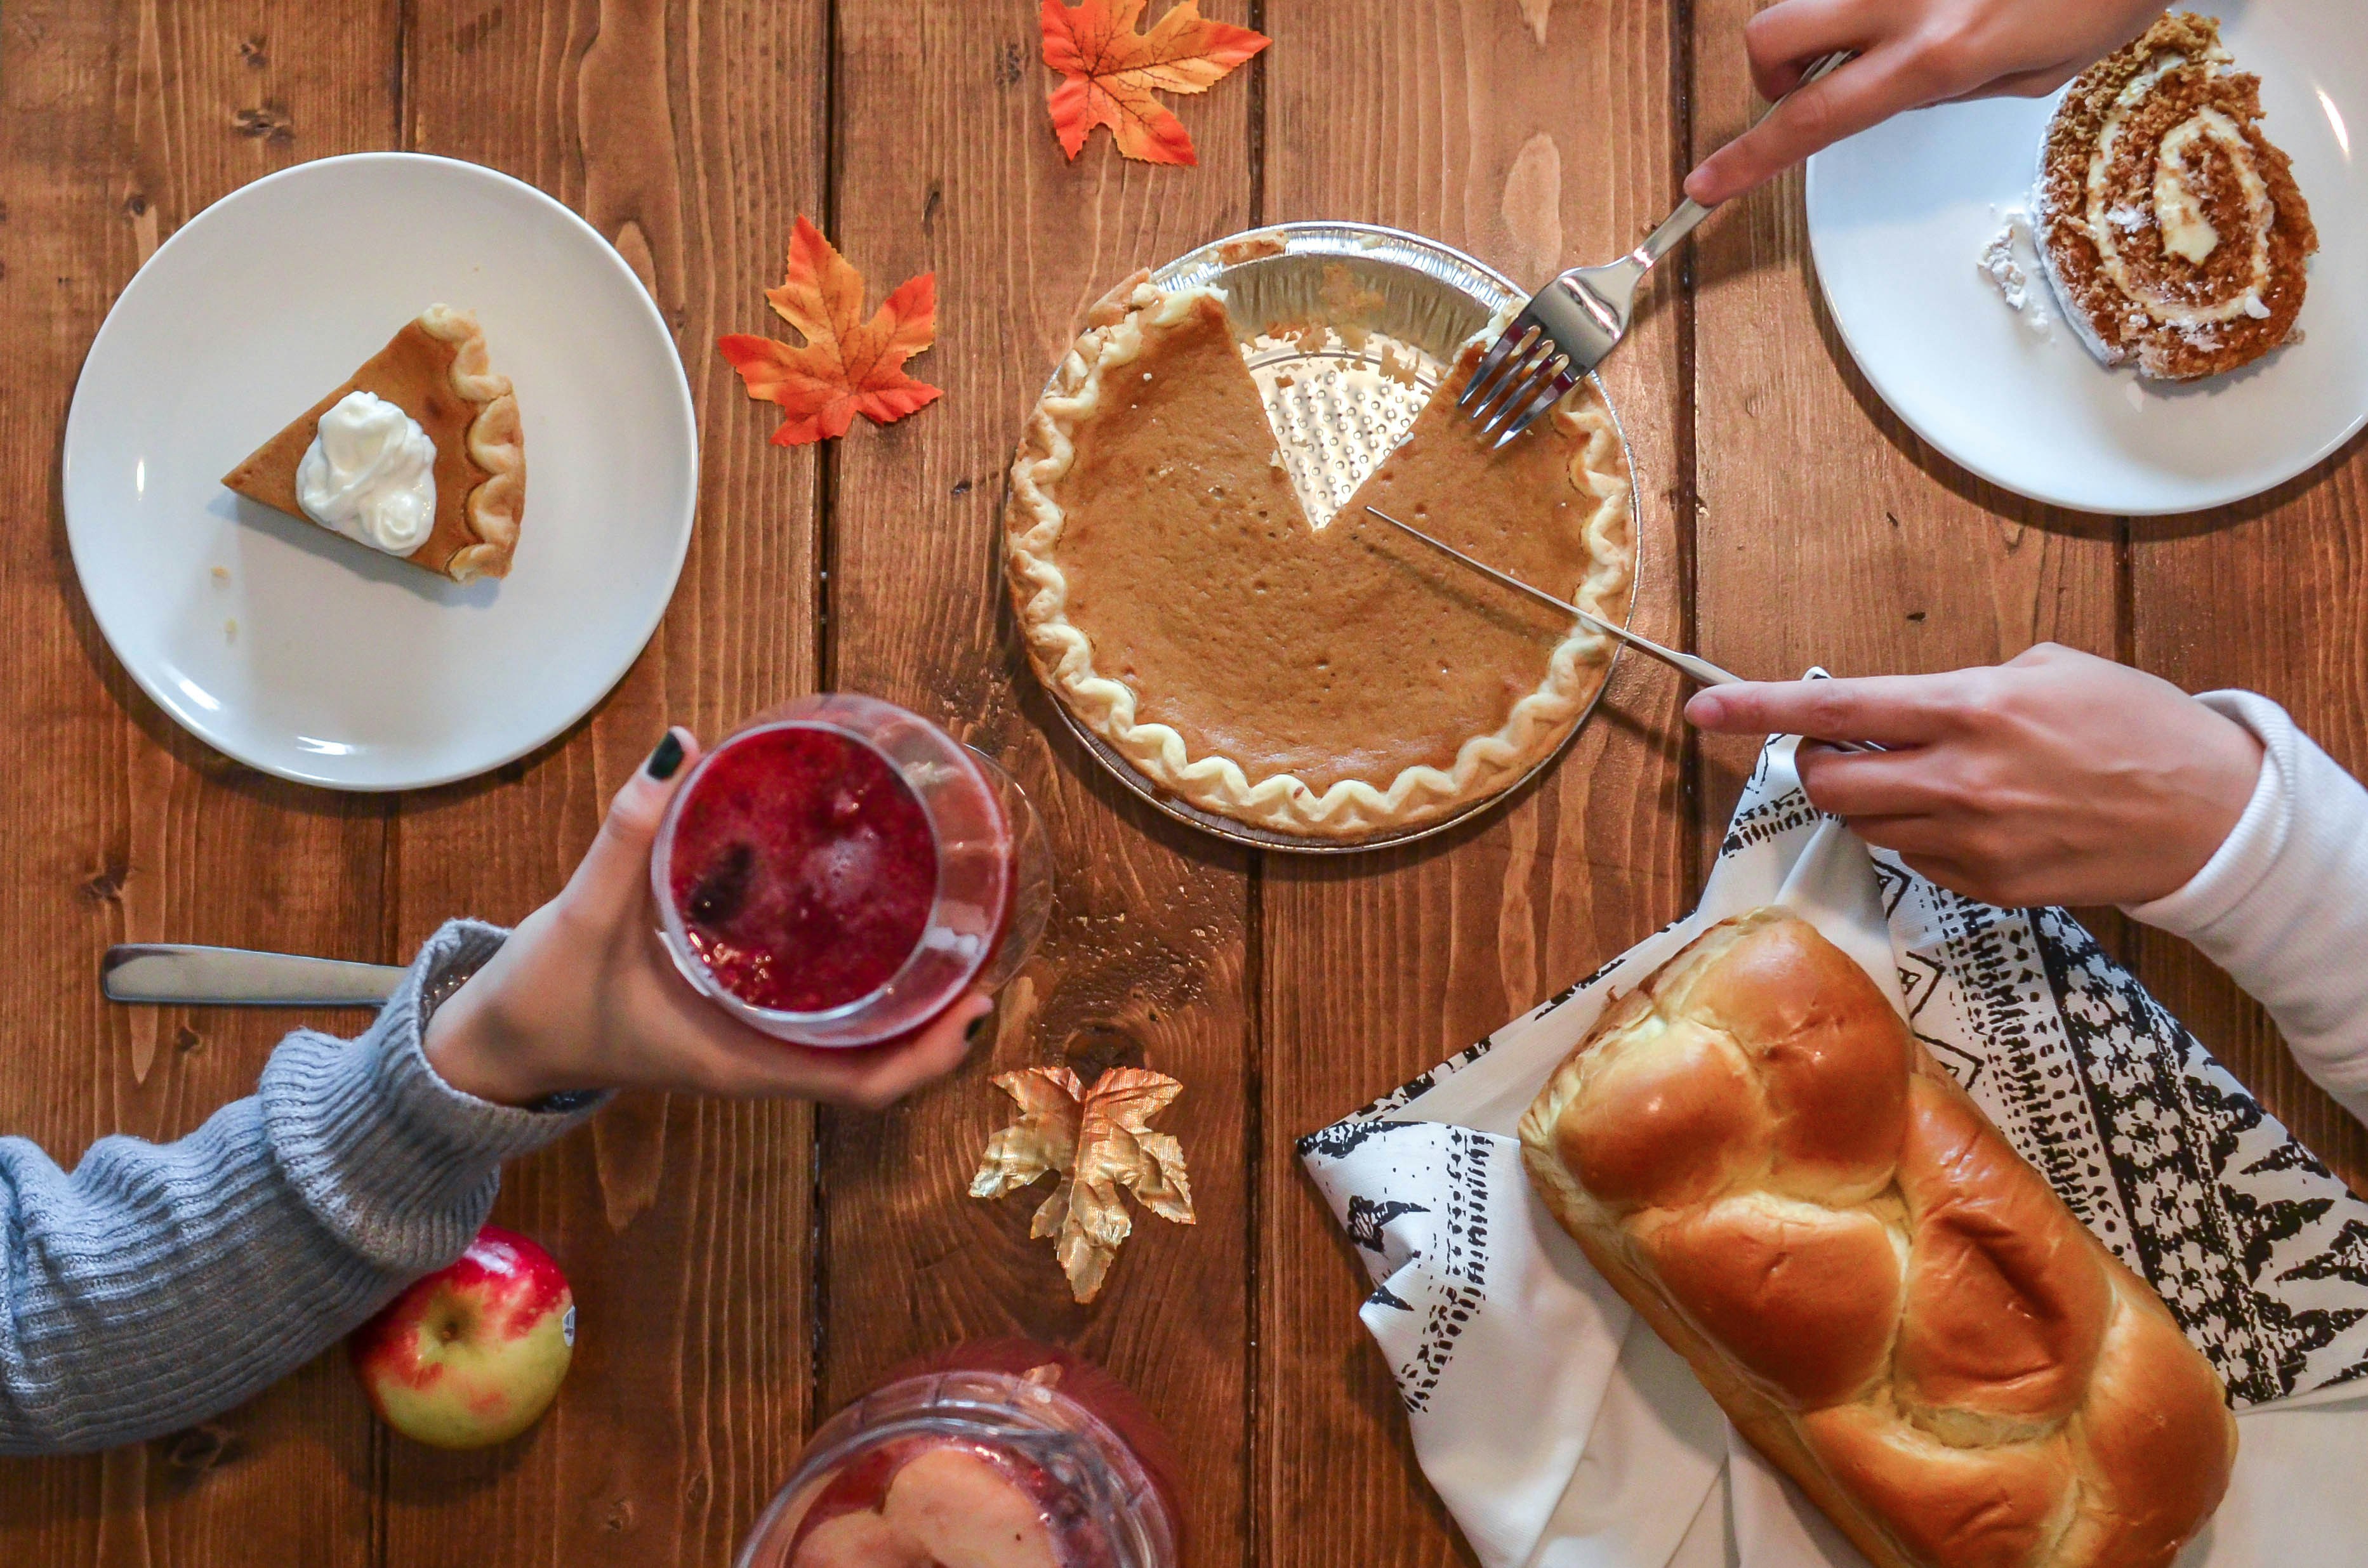 Talking turkey? Use the highest-quality happy thanksgiving imagers from Unsplash to capture the friends-and-family vibe that we all cherish.